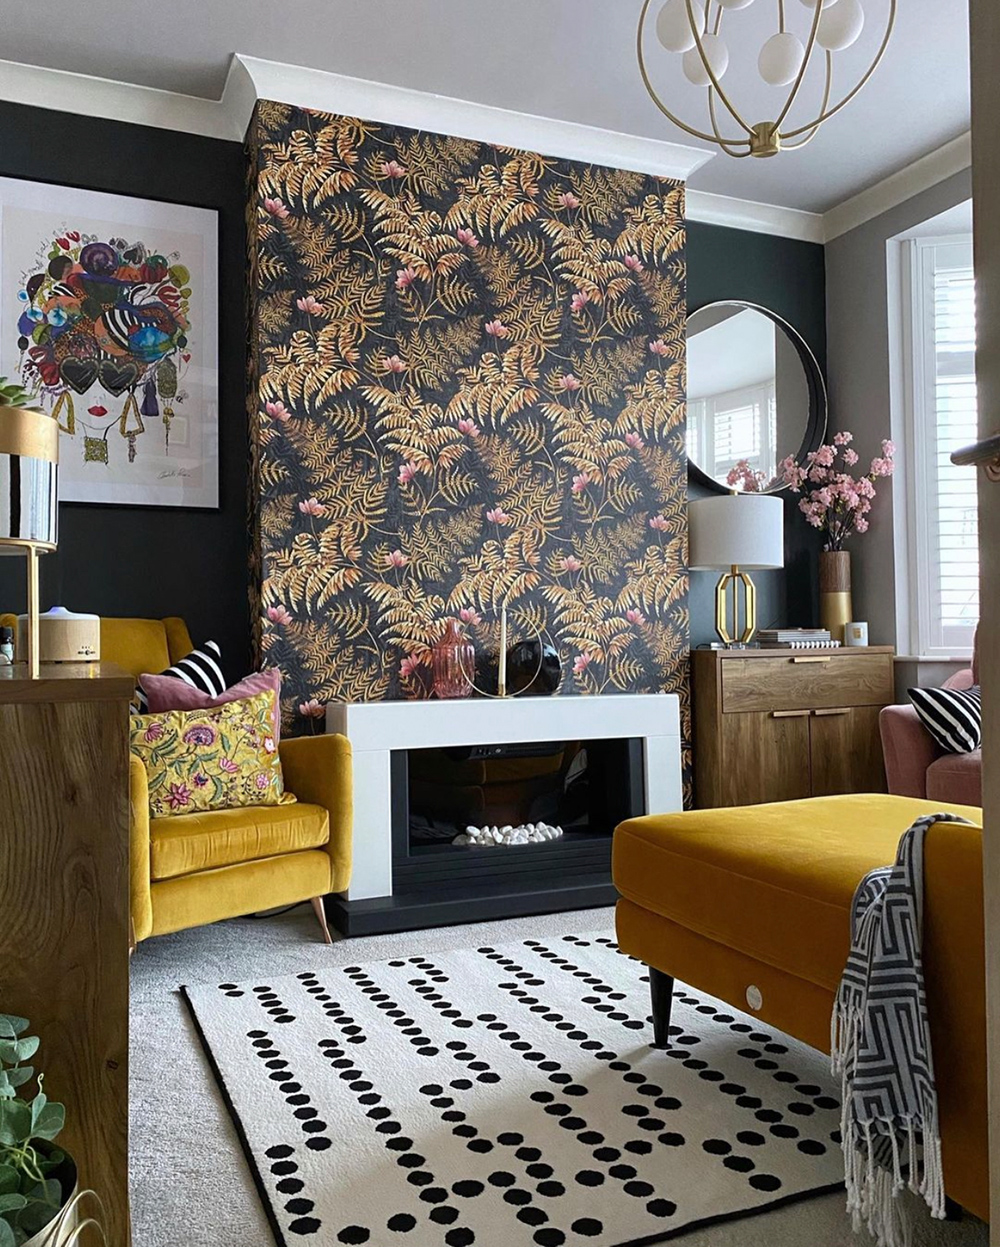 Eclectic living room decor with patterned wallpaper and yellow velvet sofa and armchair